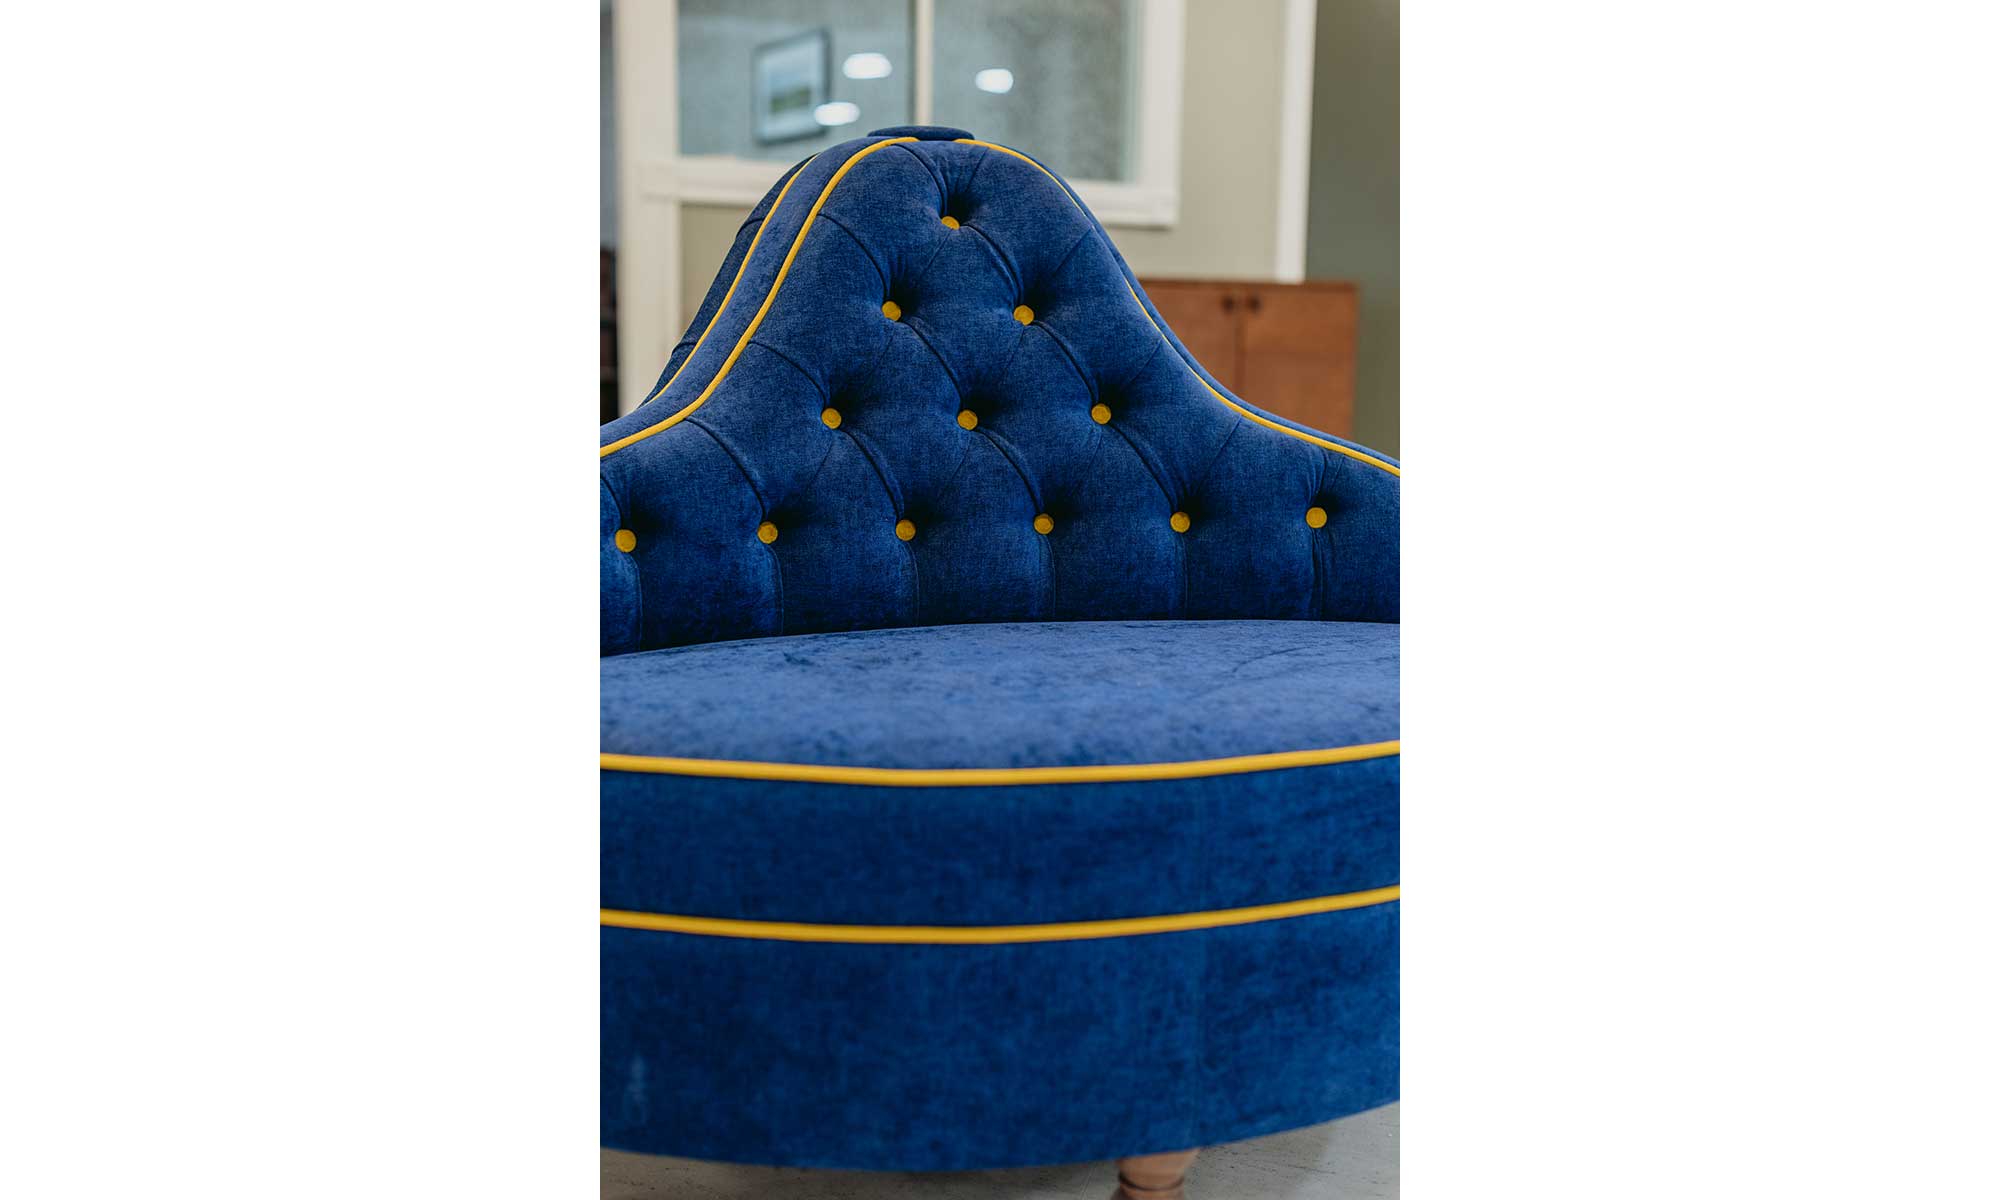 A close up of the ashbourne ottoman in a blue velvet with yellow piping